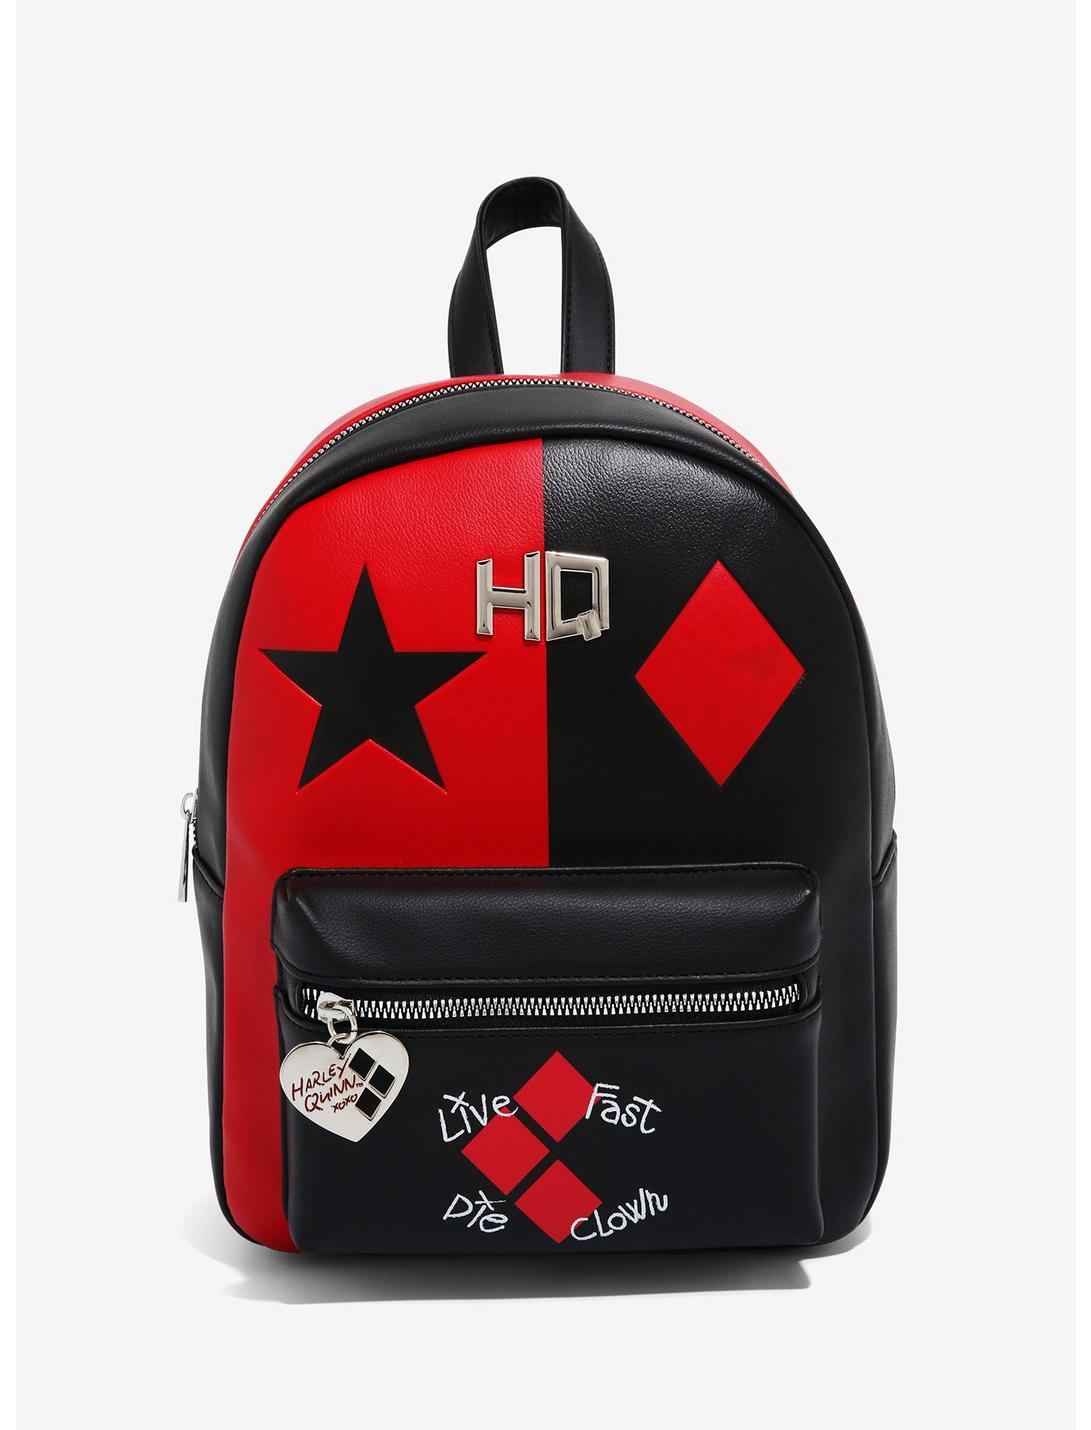 DC Comics The Suicide Squad Harley Quinn Live Fast Die Clown Mini Backpack, , hi-res